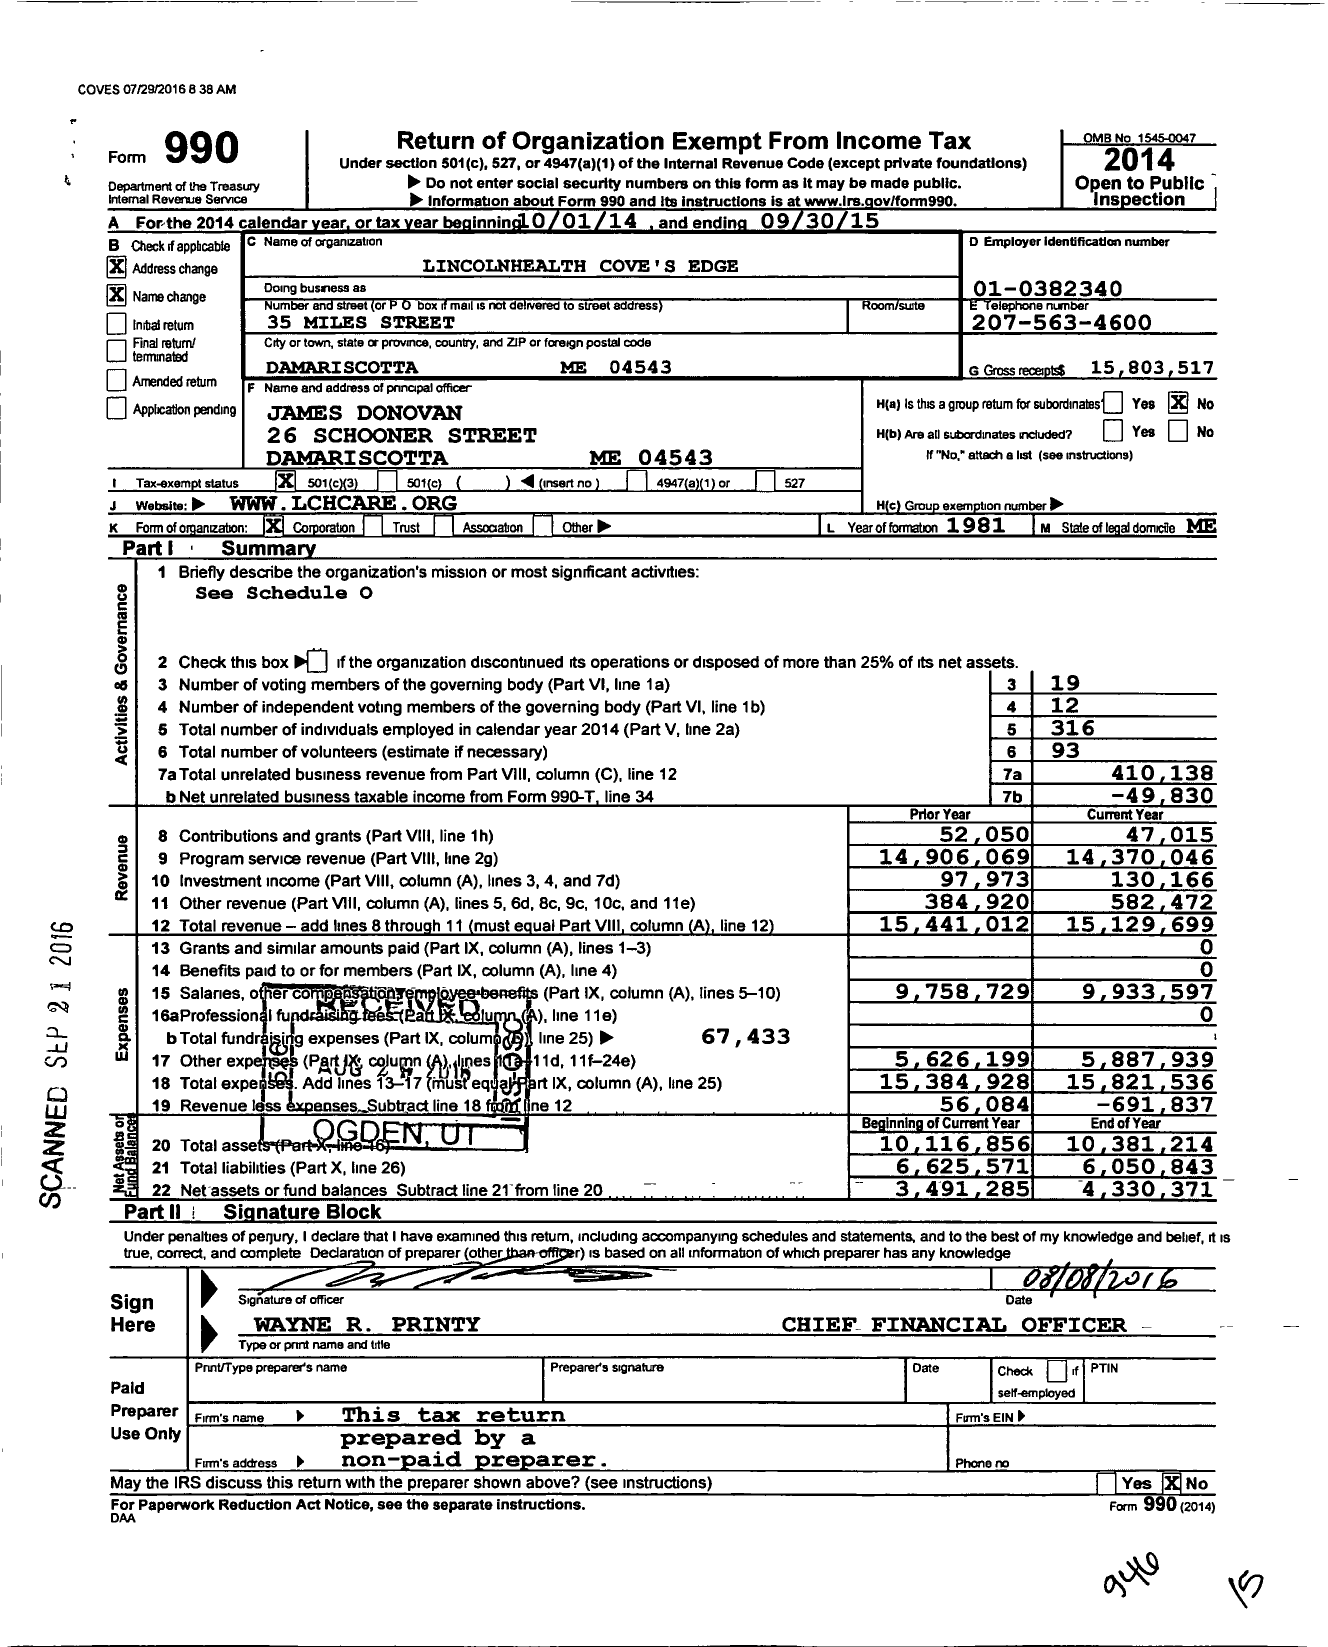 Image of first page of 2014 Form 990 for Lincolnhealth Cove's Edge